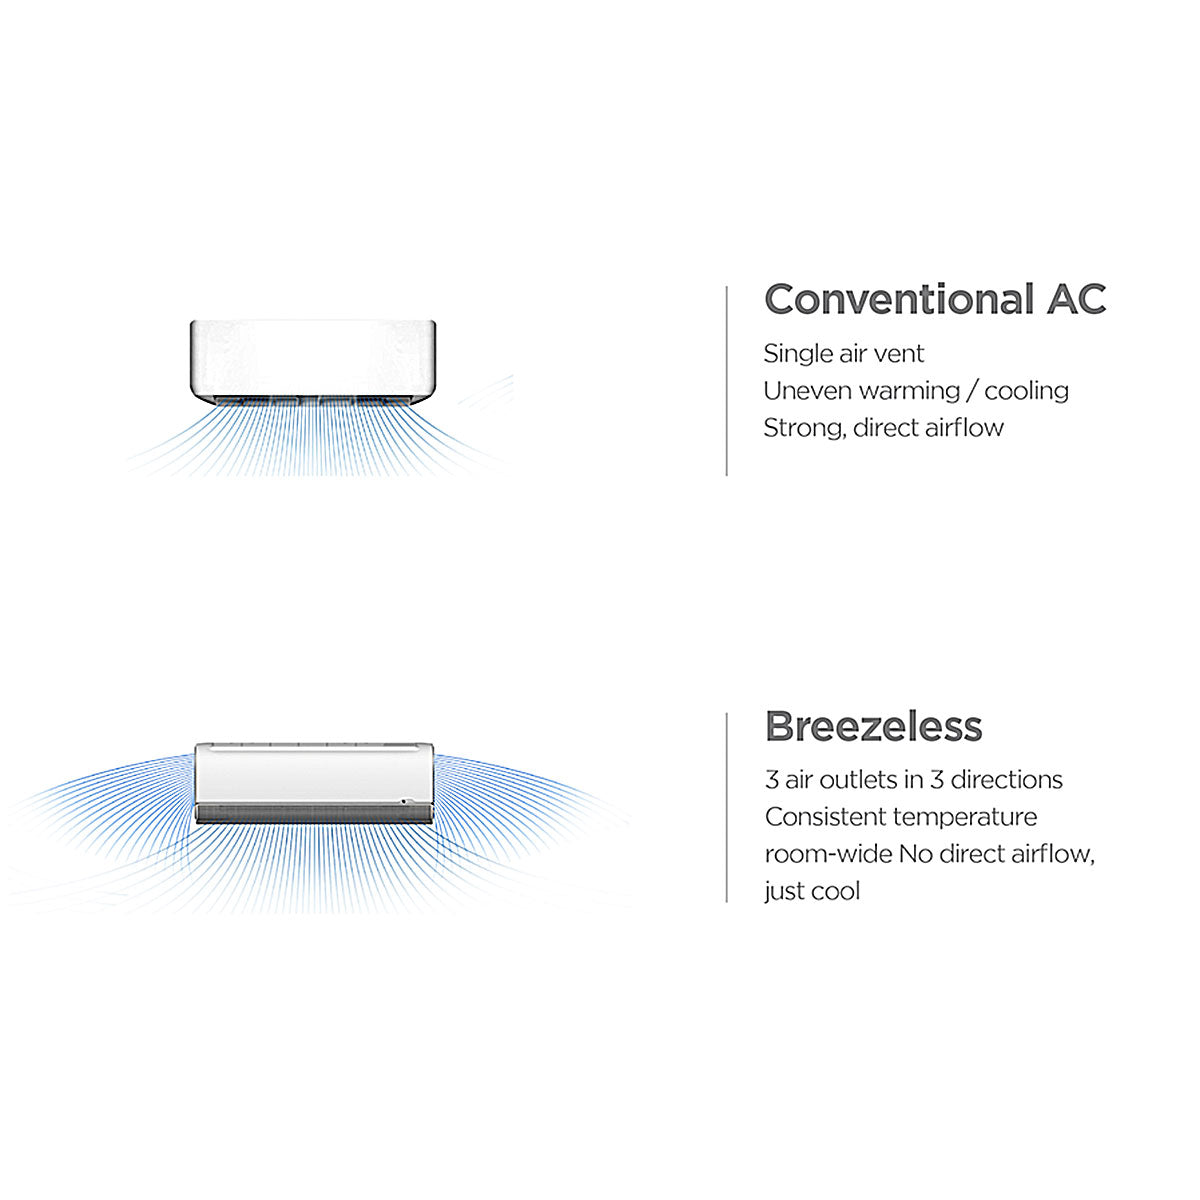 Midea Breezeless 3.5kw Split Air Conditioner 6 seconds 360 even cooling